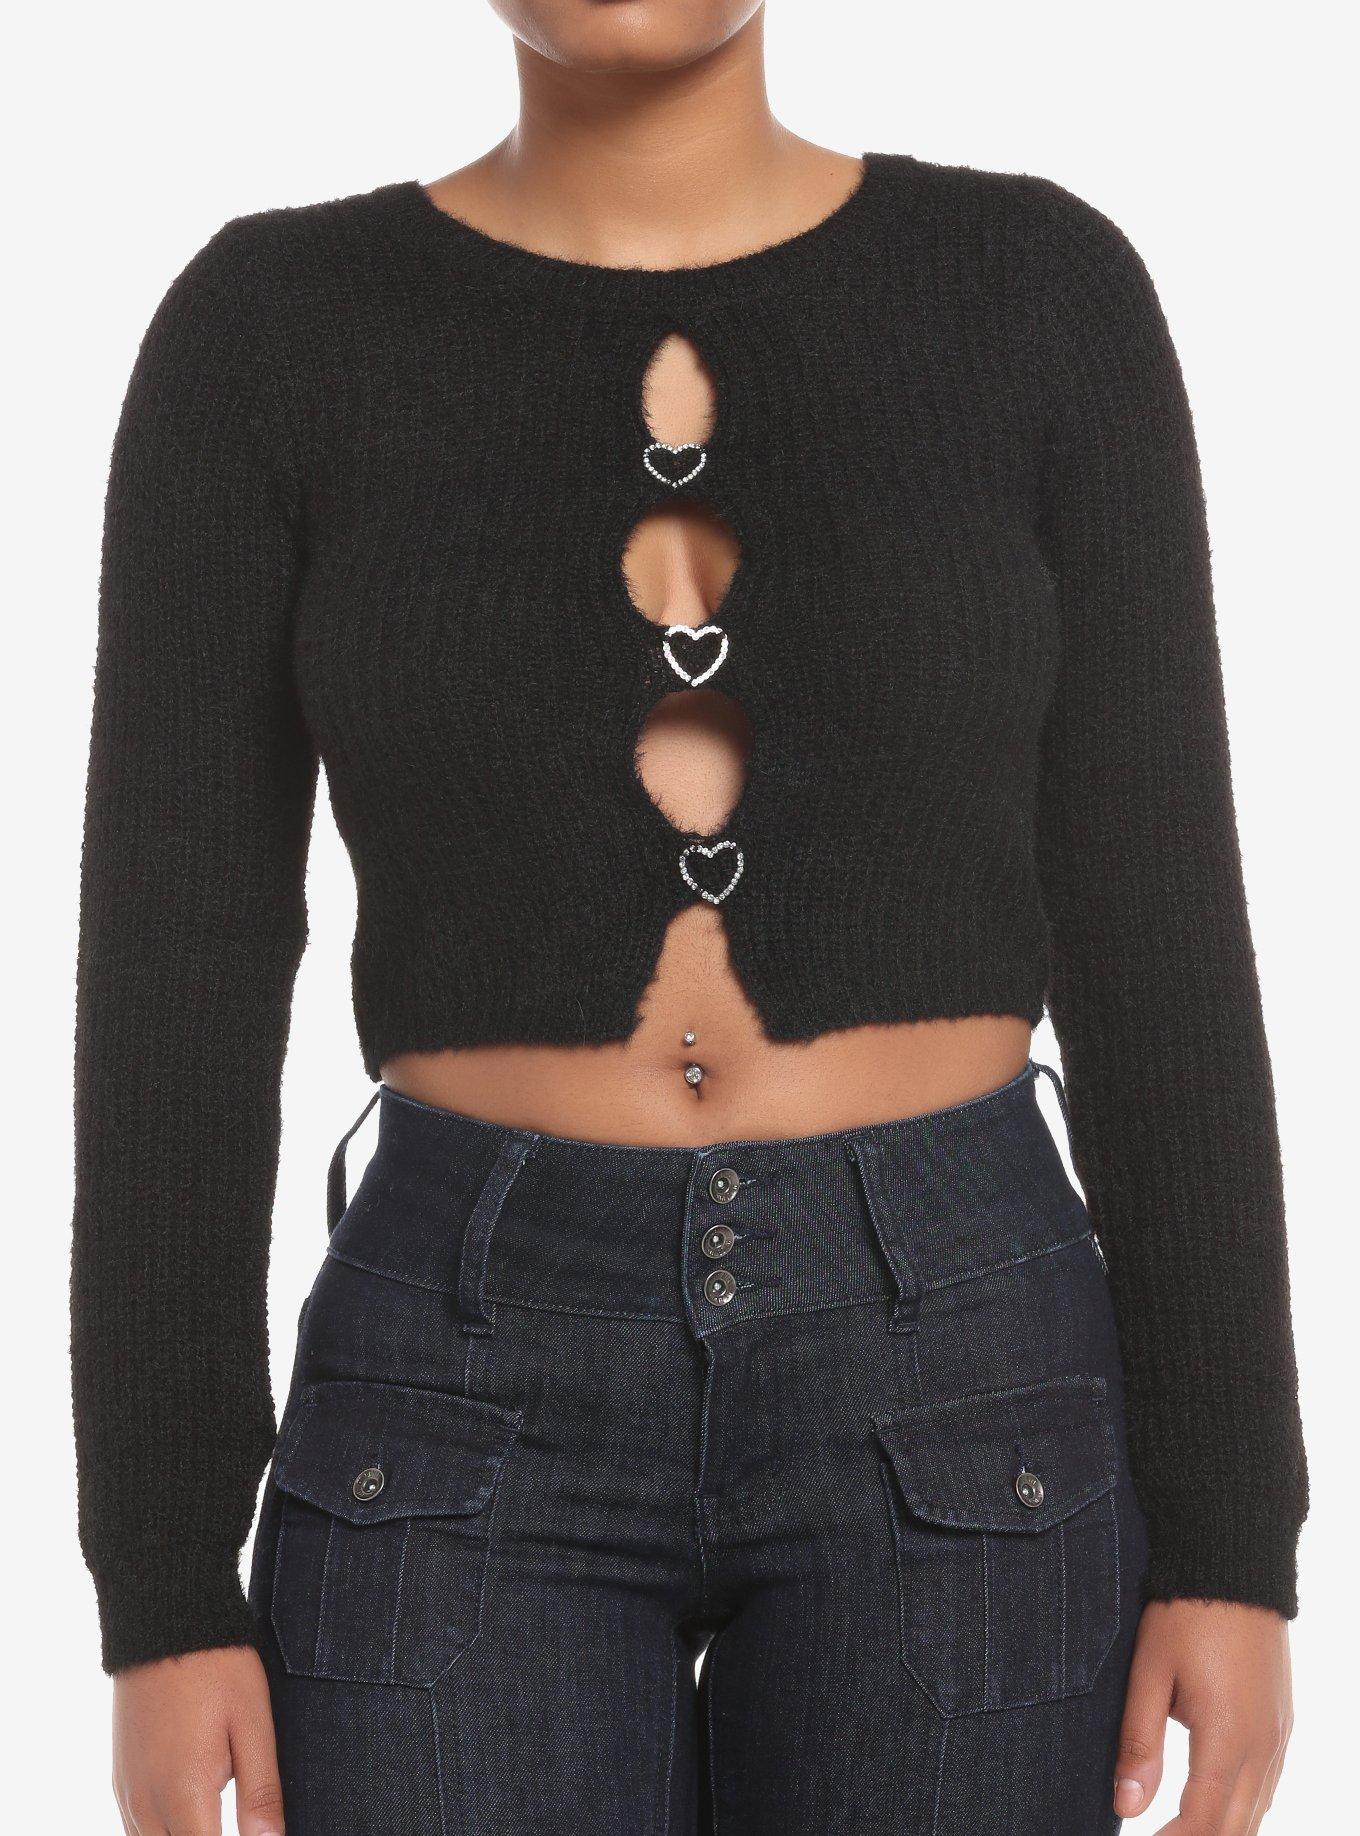 Black Fuzzy Heart Bling Cut-Out Girls Crop Sweater, IVORY, hi-res